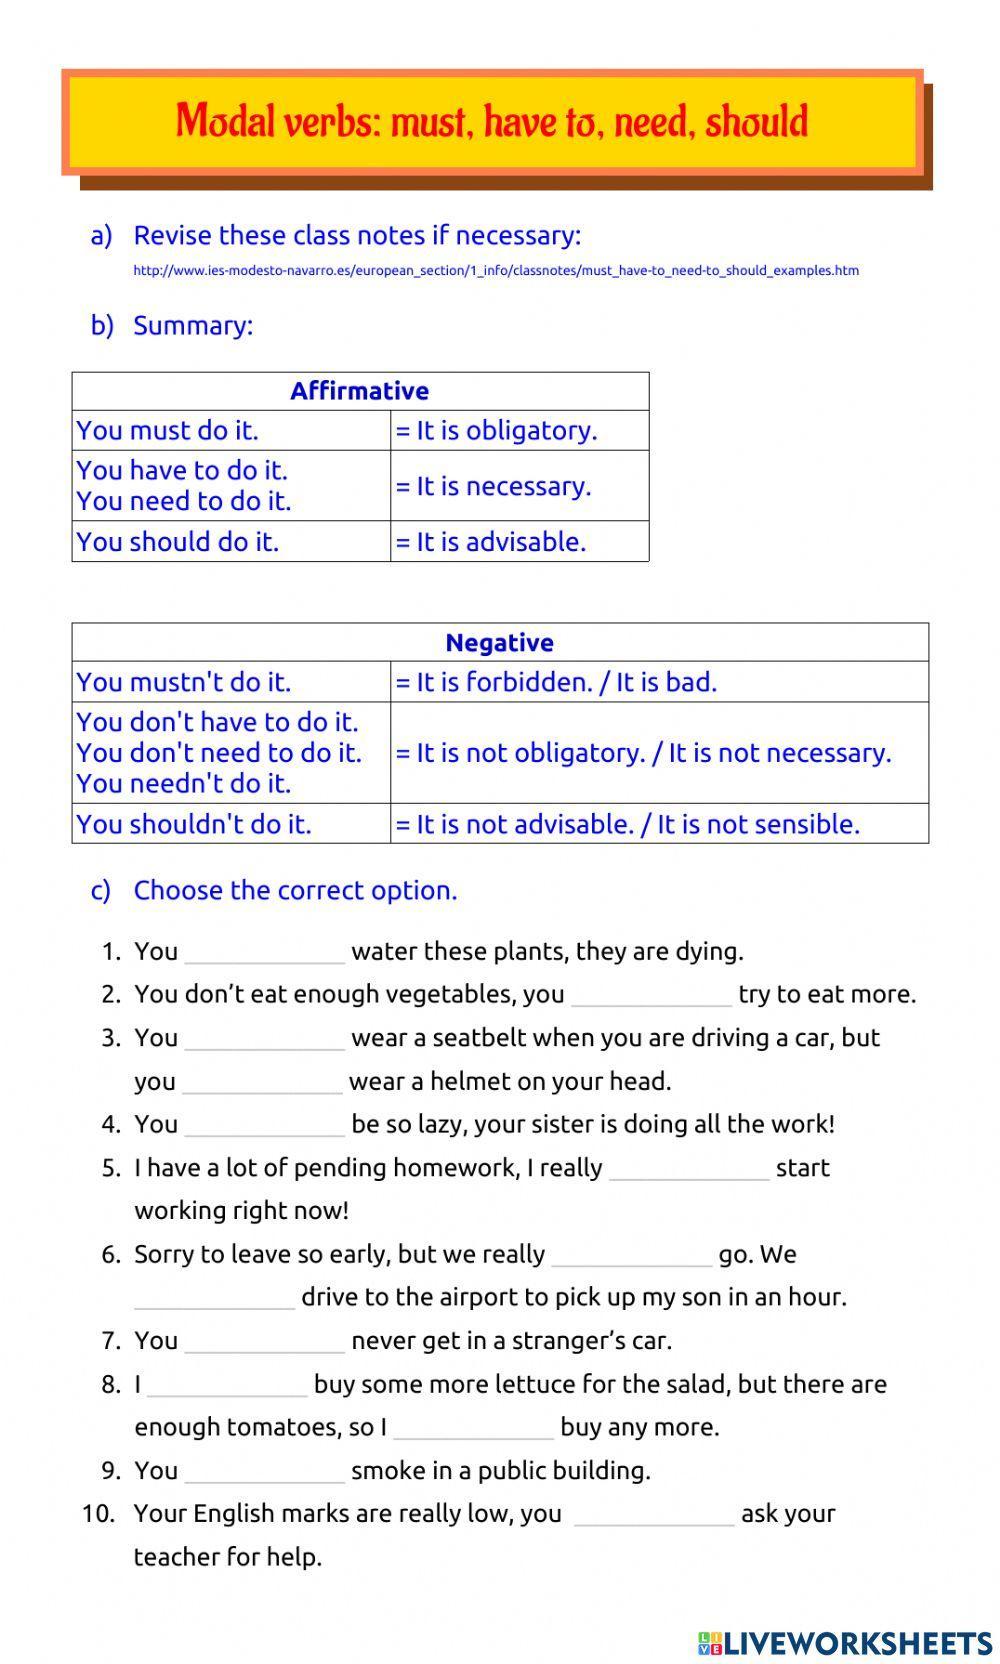 Modal verbs: must, have to, need, should worksheet